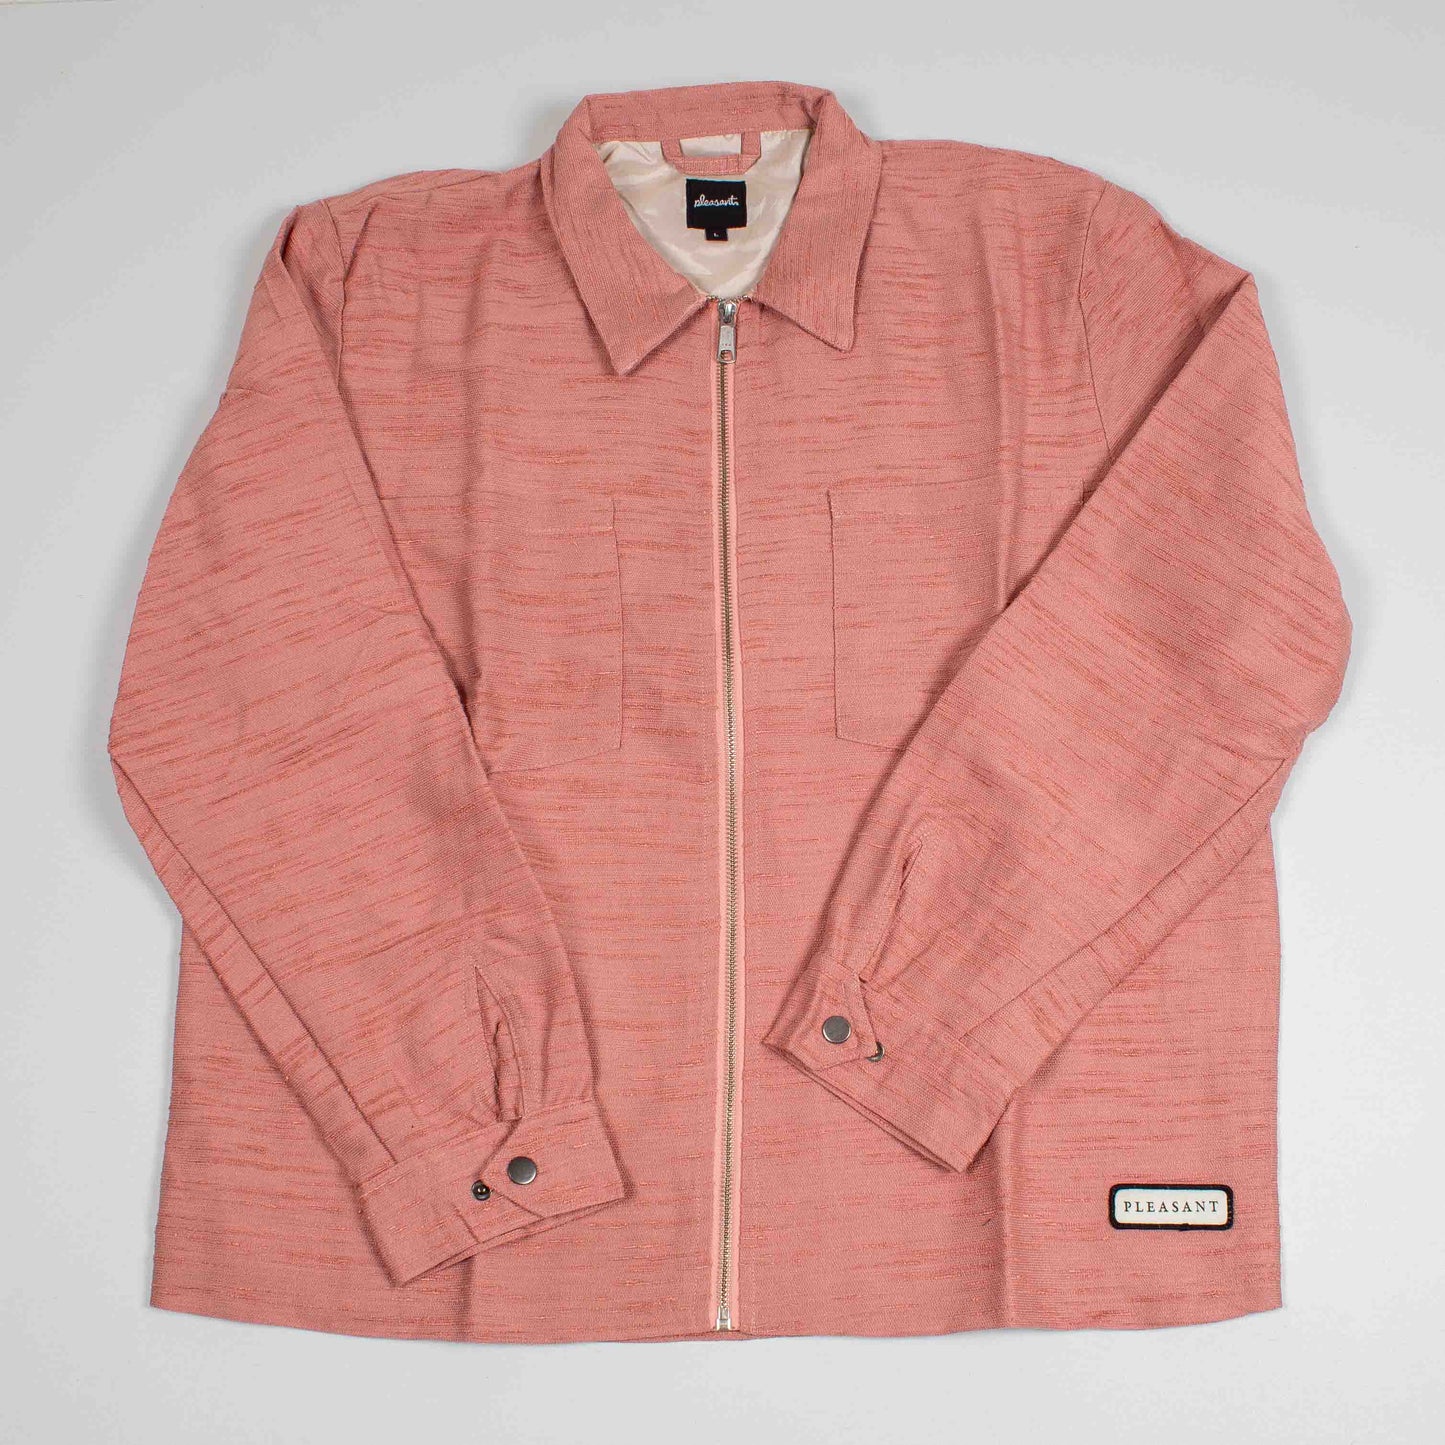 Light red upcycled jacket